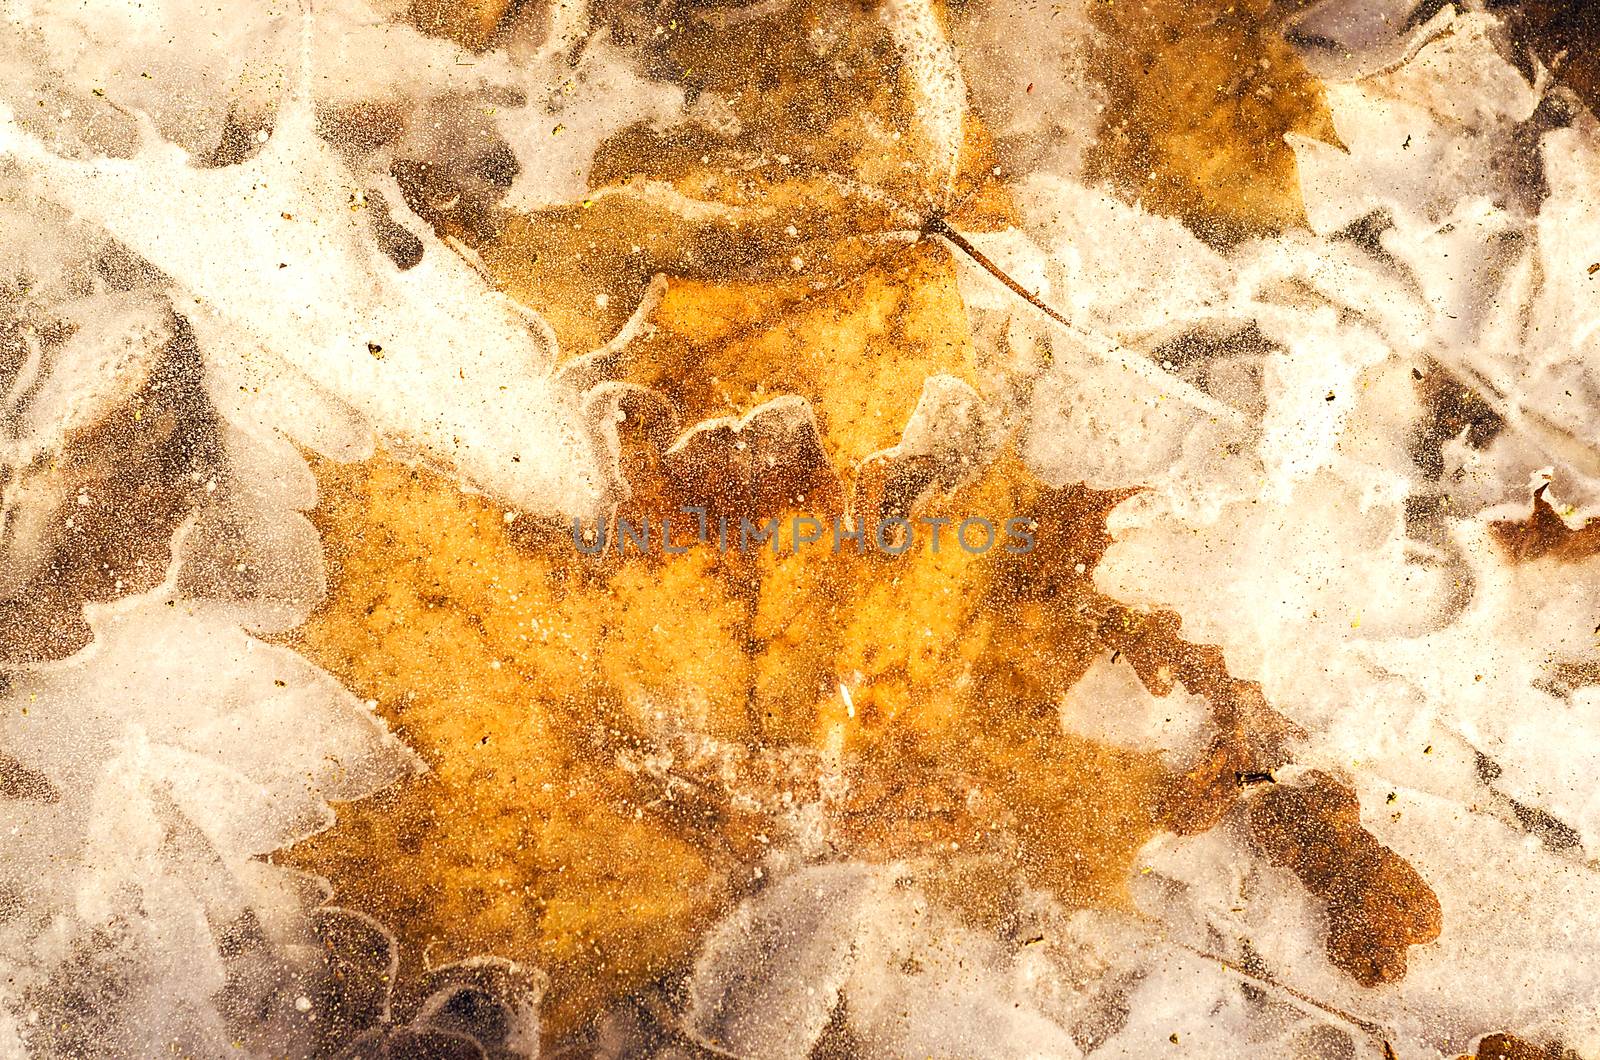 Fall colored tree leaves under thin layer of snow. Mix of winter and autumn. Frozen water with autumn leaves. Natural autumn background.